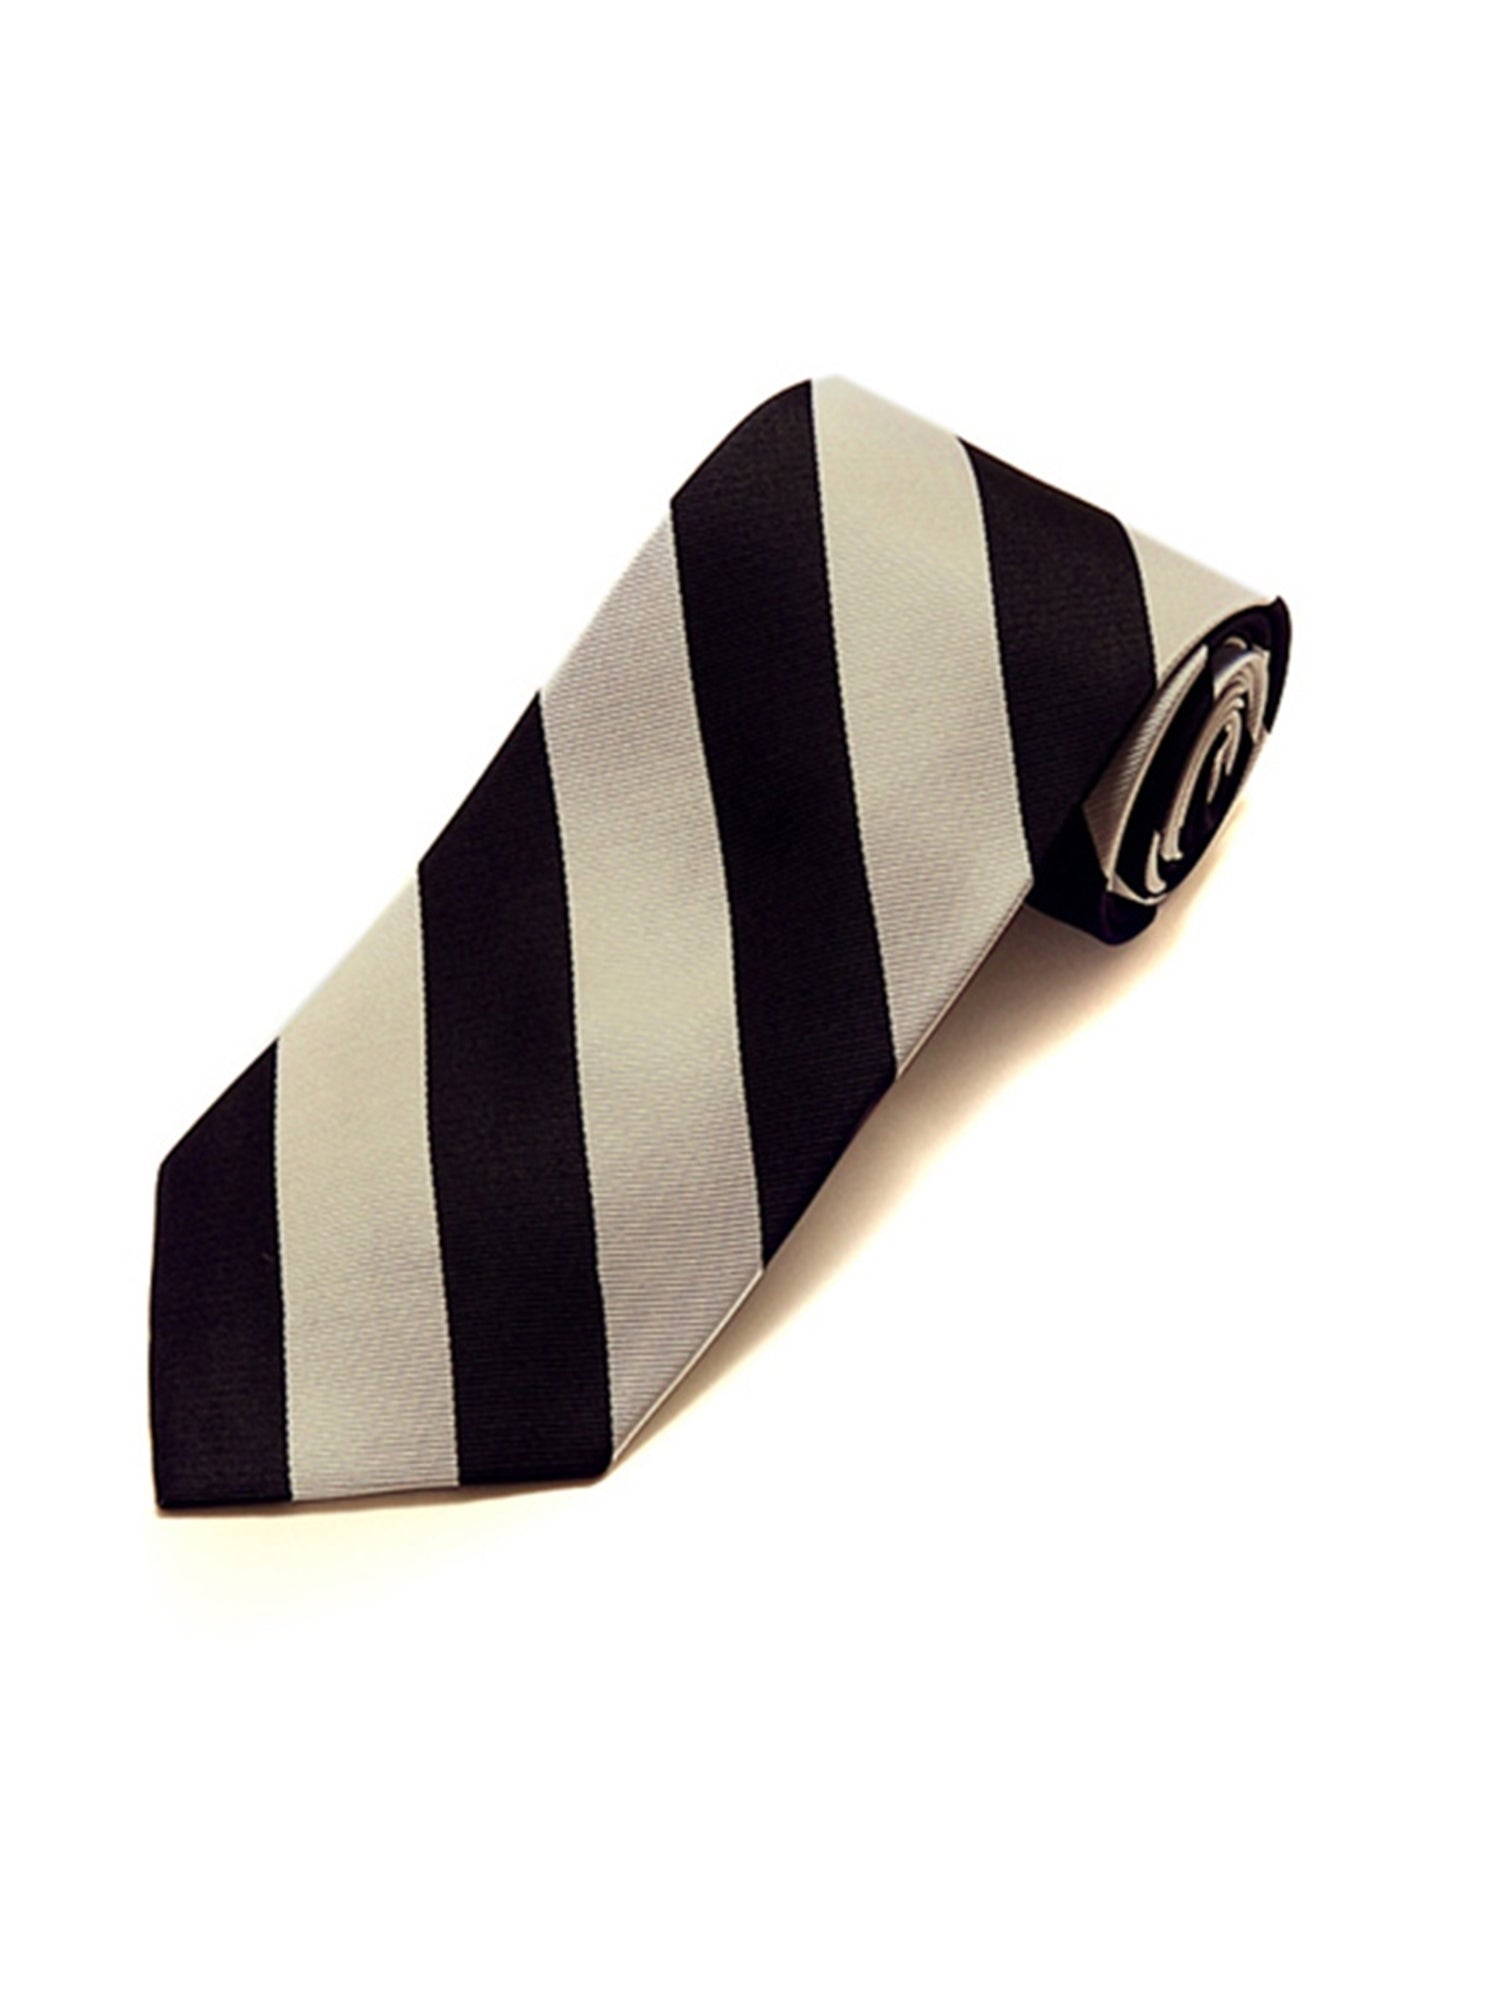 Men's College Striped Colored Silk Long Or X-Long Neck Tie Neck Tie TheDapperTie Taupe & Black 57" long & 3.25" wide 